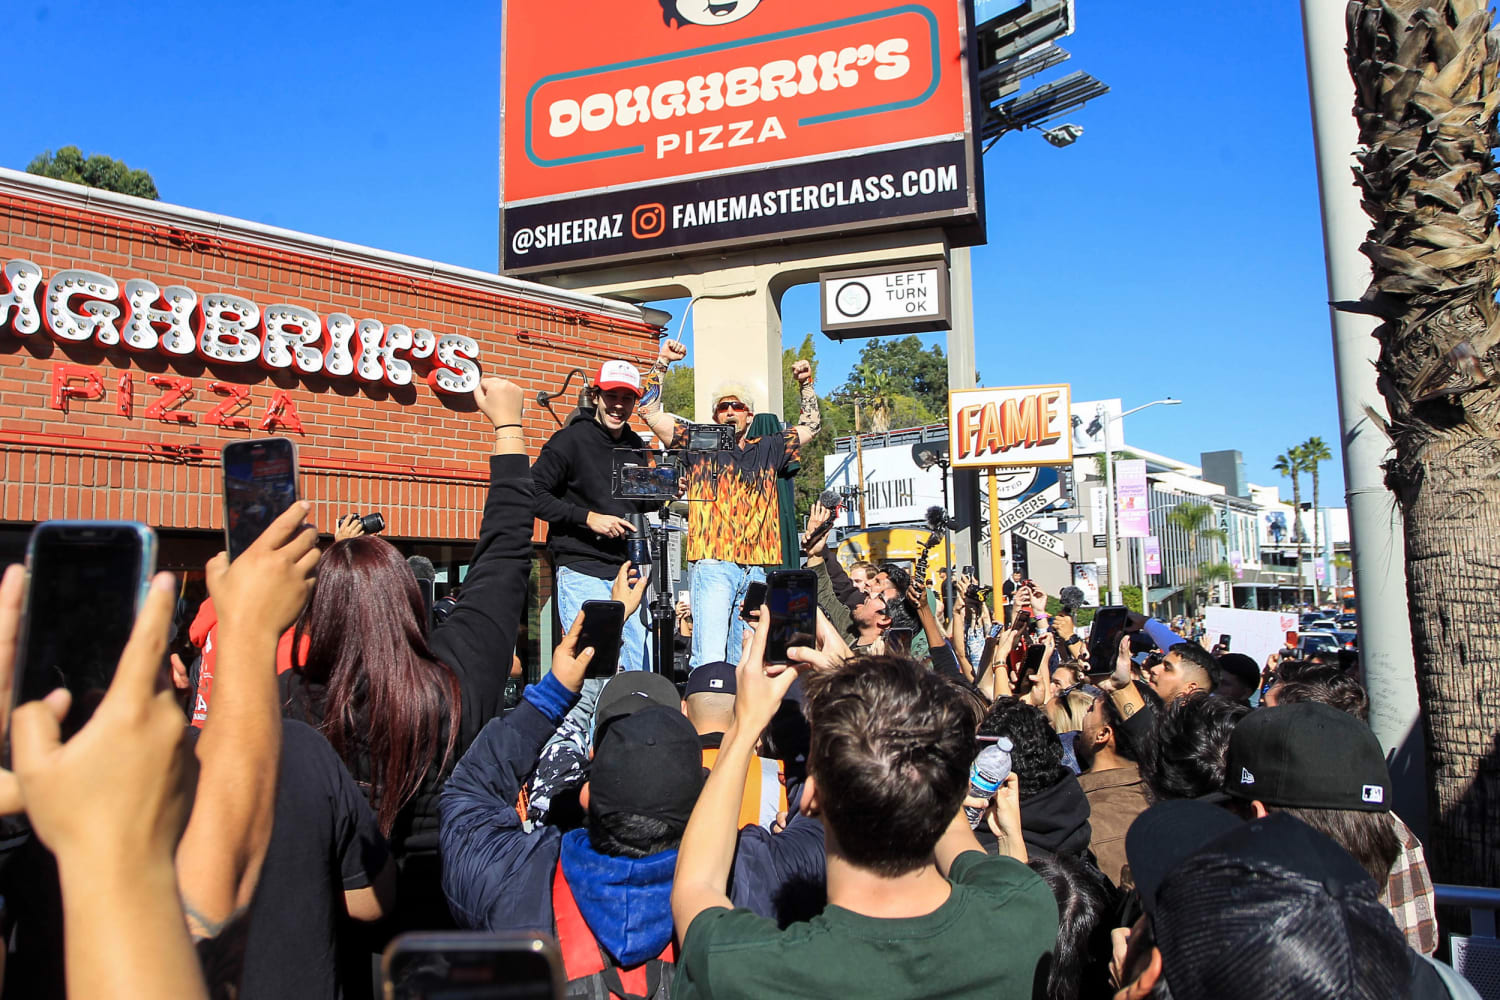 David Dobrik's New Pizza Place Gets Early Morning Campers for Opening